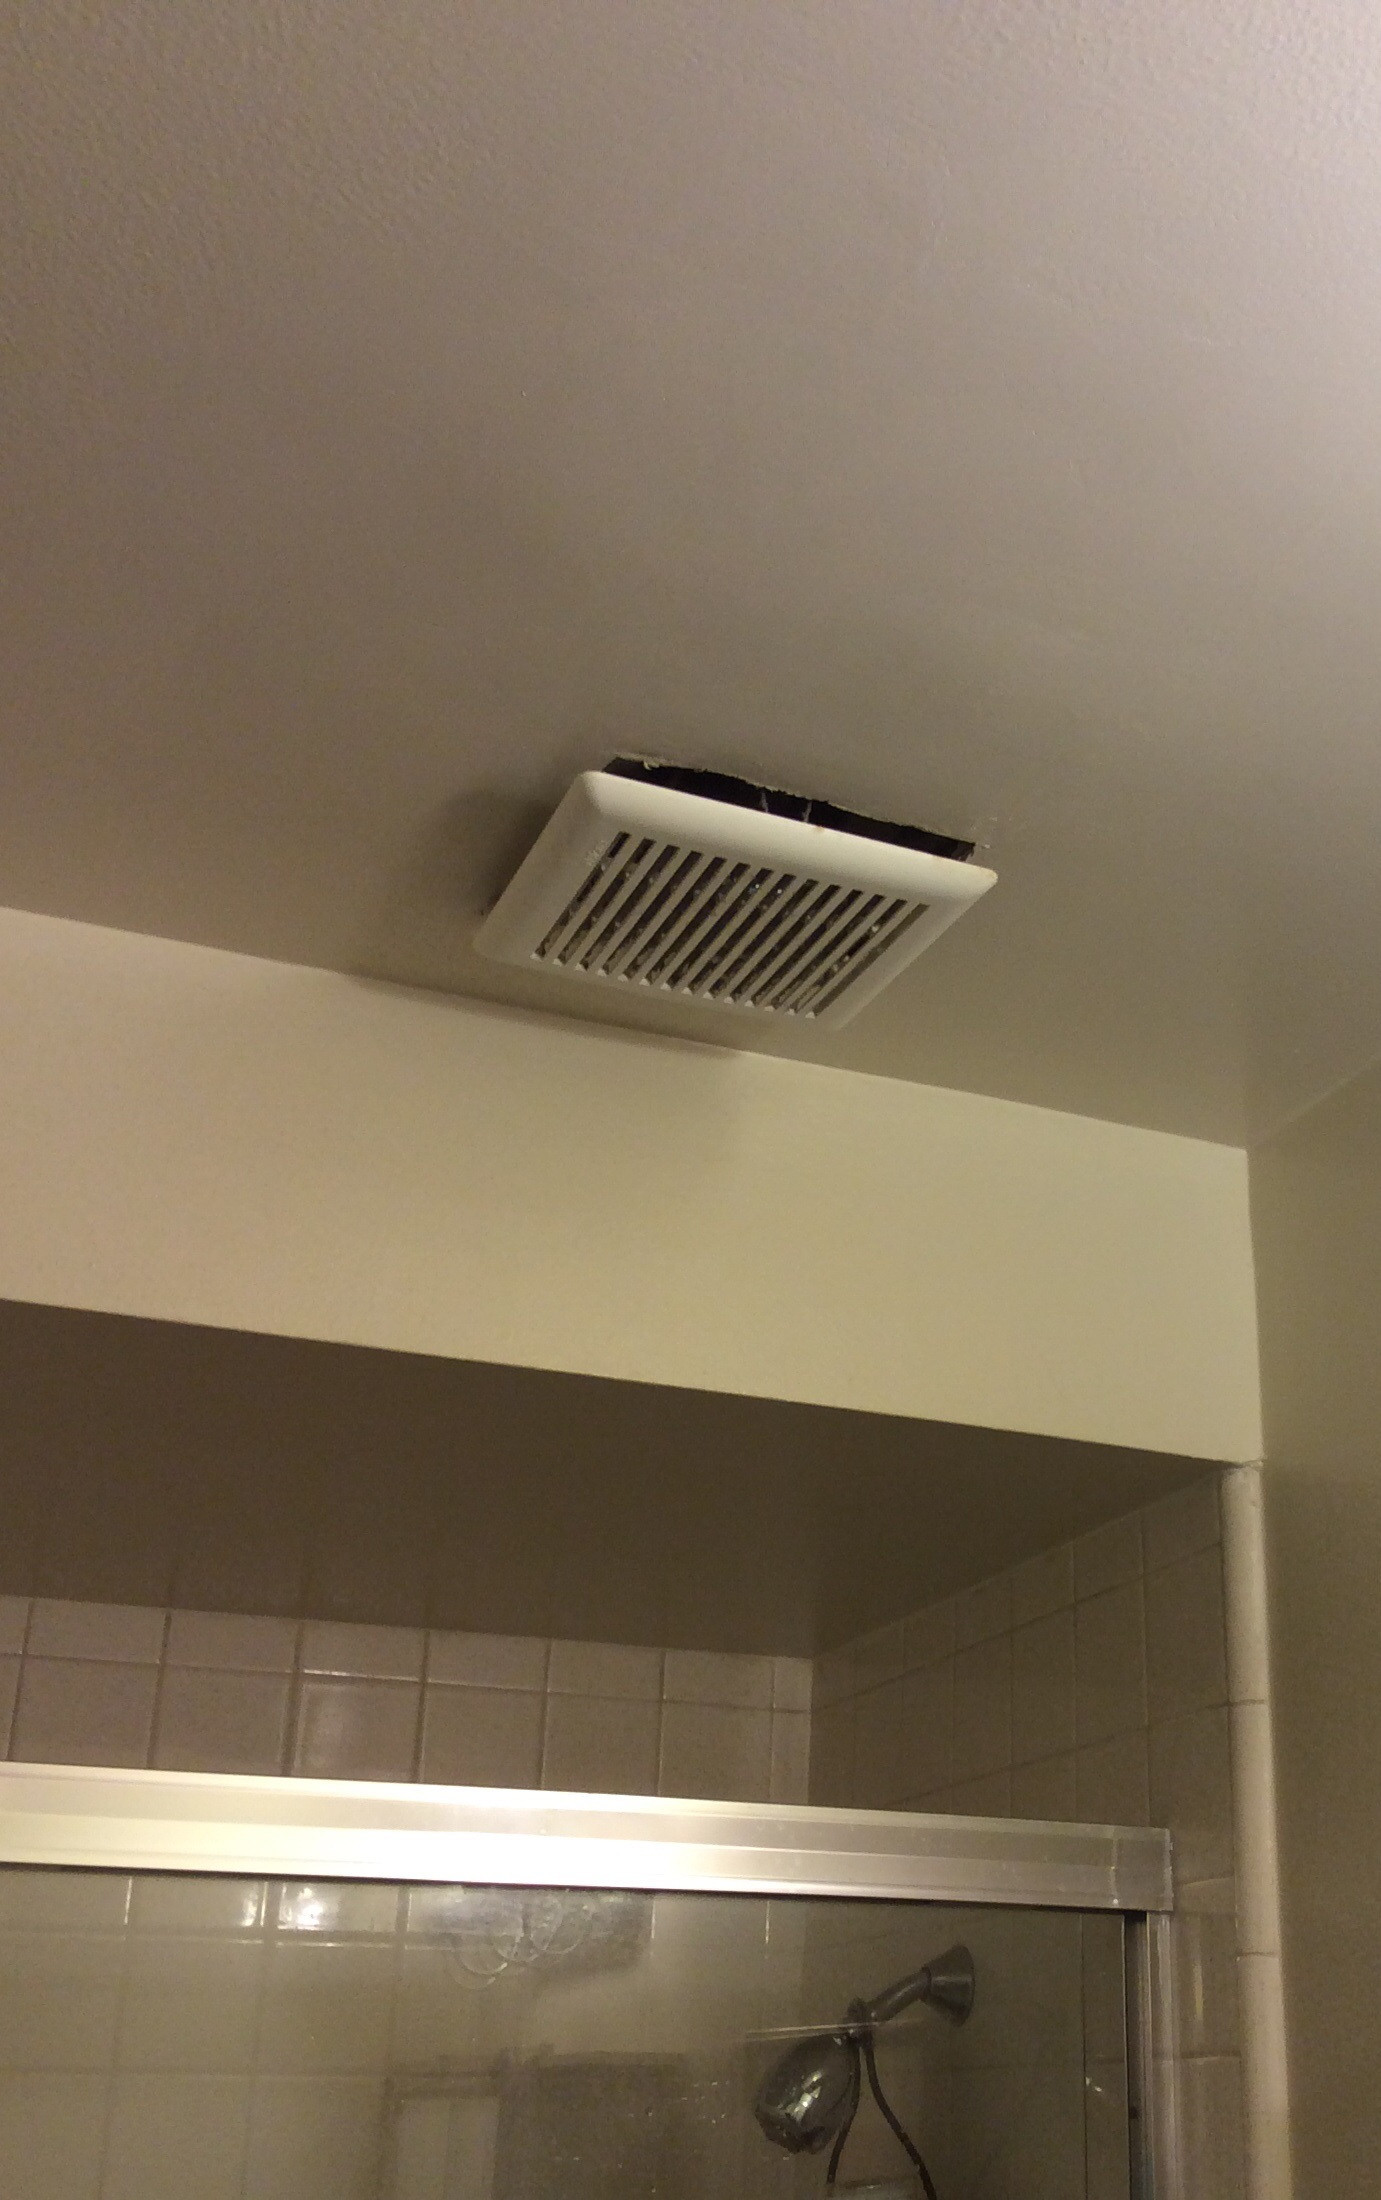 Exhaust Fan For Bathroom
 bathroom Is it normal for an exhaust fan cover to hang